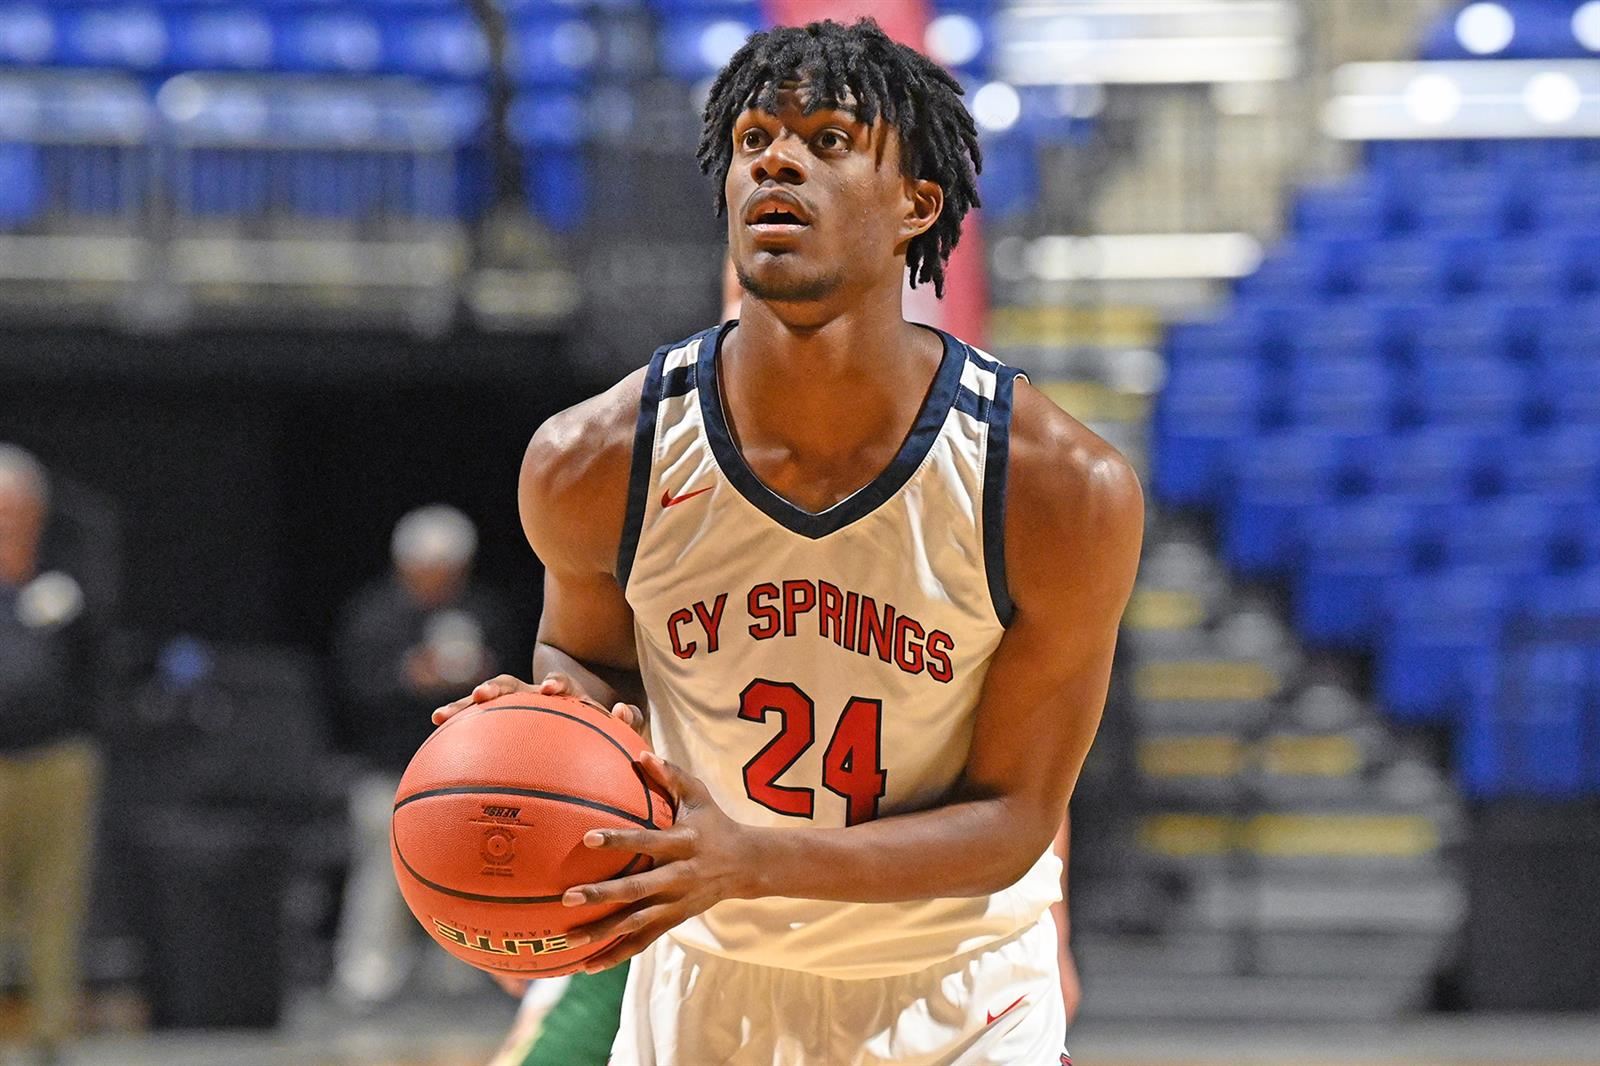 Cypress Springs High School senior Jaheim Wiley was named the District 16-6A boys’ basketball Defensive Player of the Year.